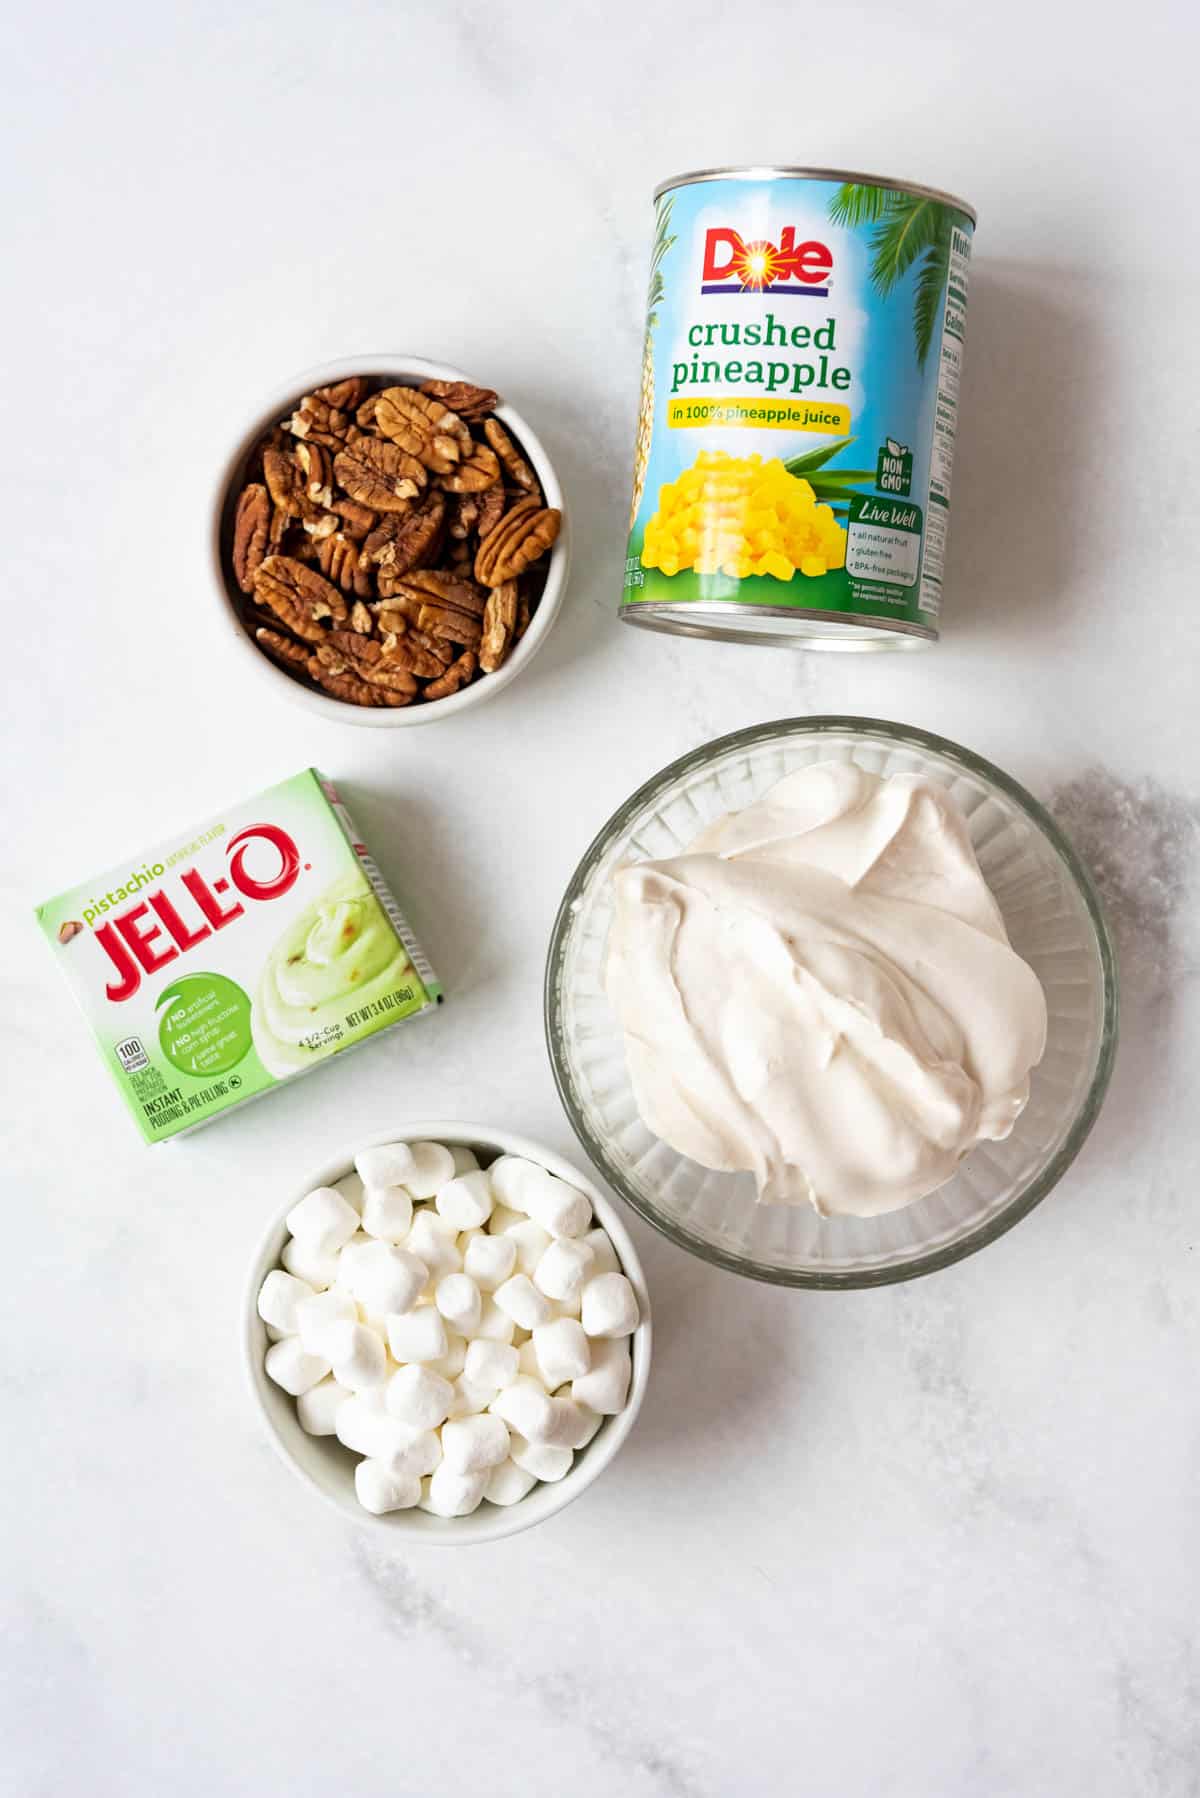 A bowl of whipped cream, marshmallows, pecans, and a can of crushed pineapple and package of pistachio instant pudding.